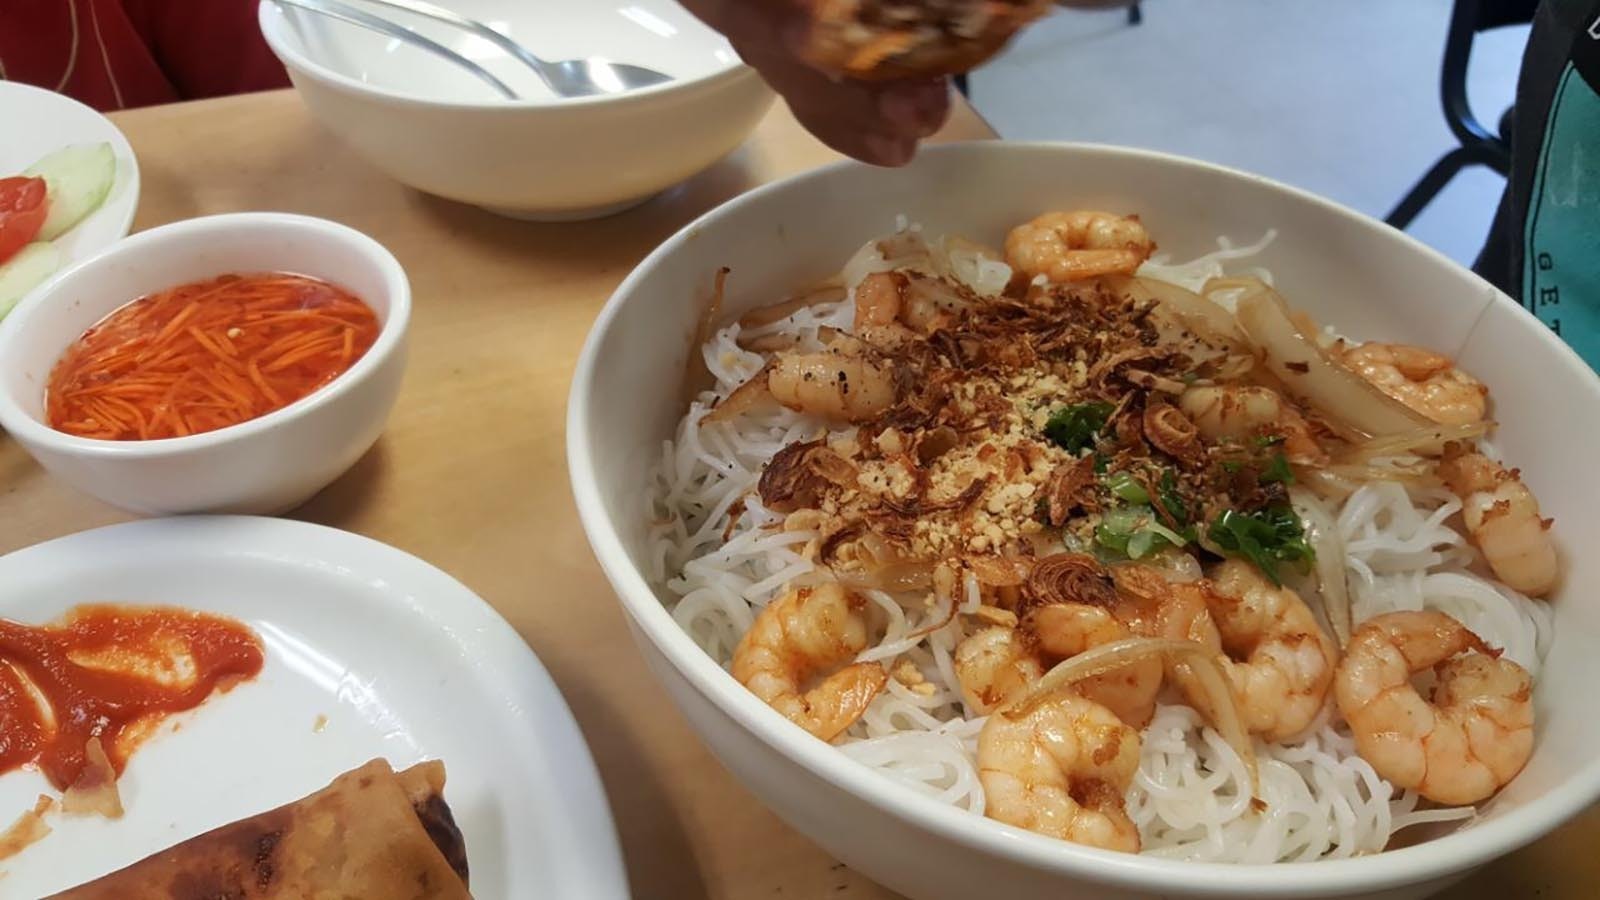 Customers rave about the authentic food at Pho Saigon in Casper, Wyoming.